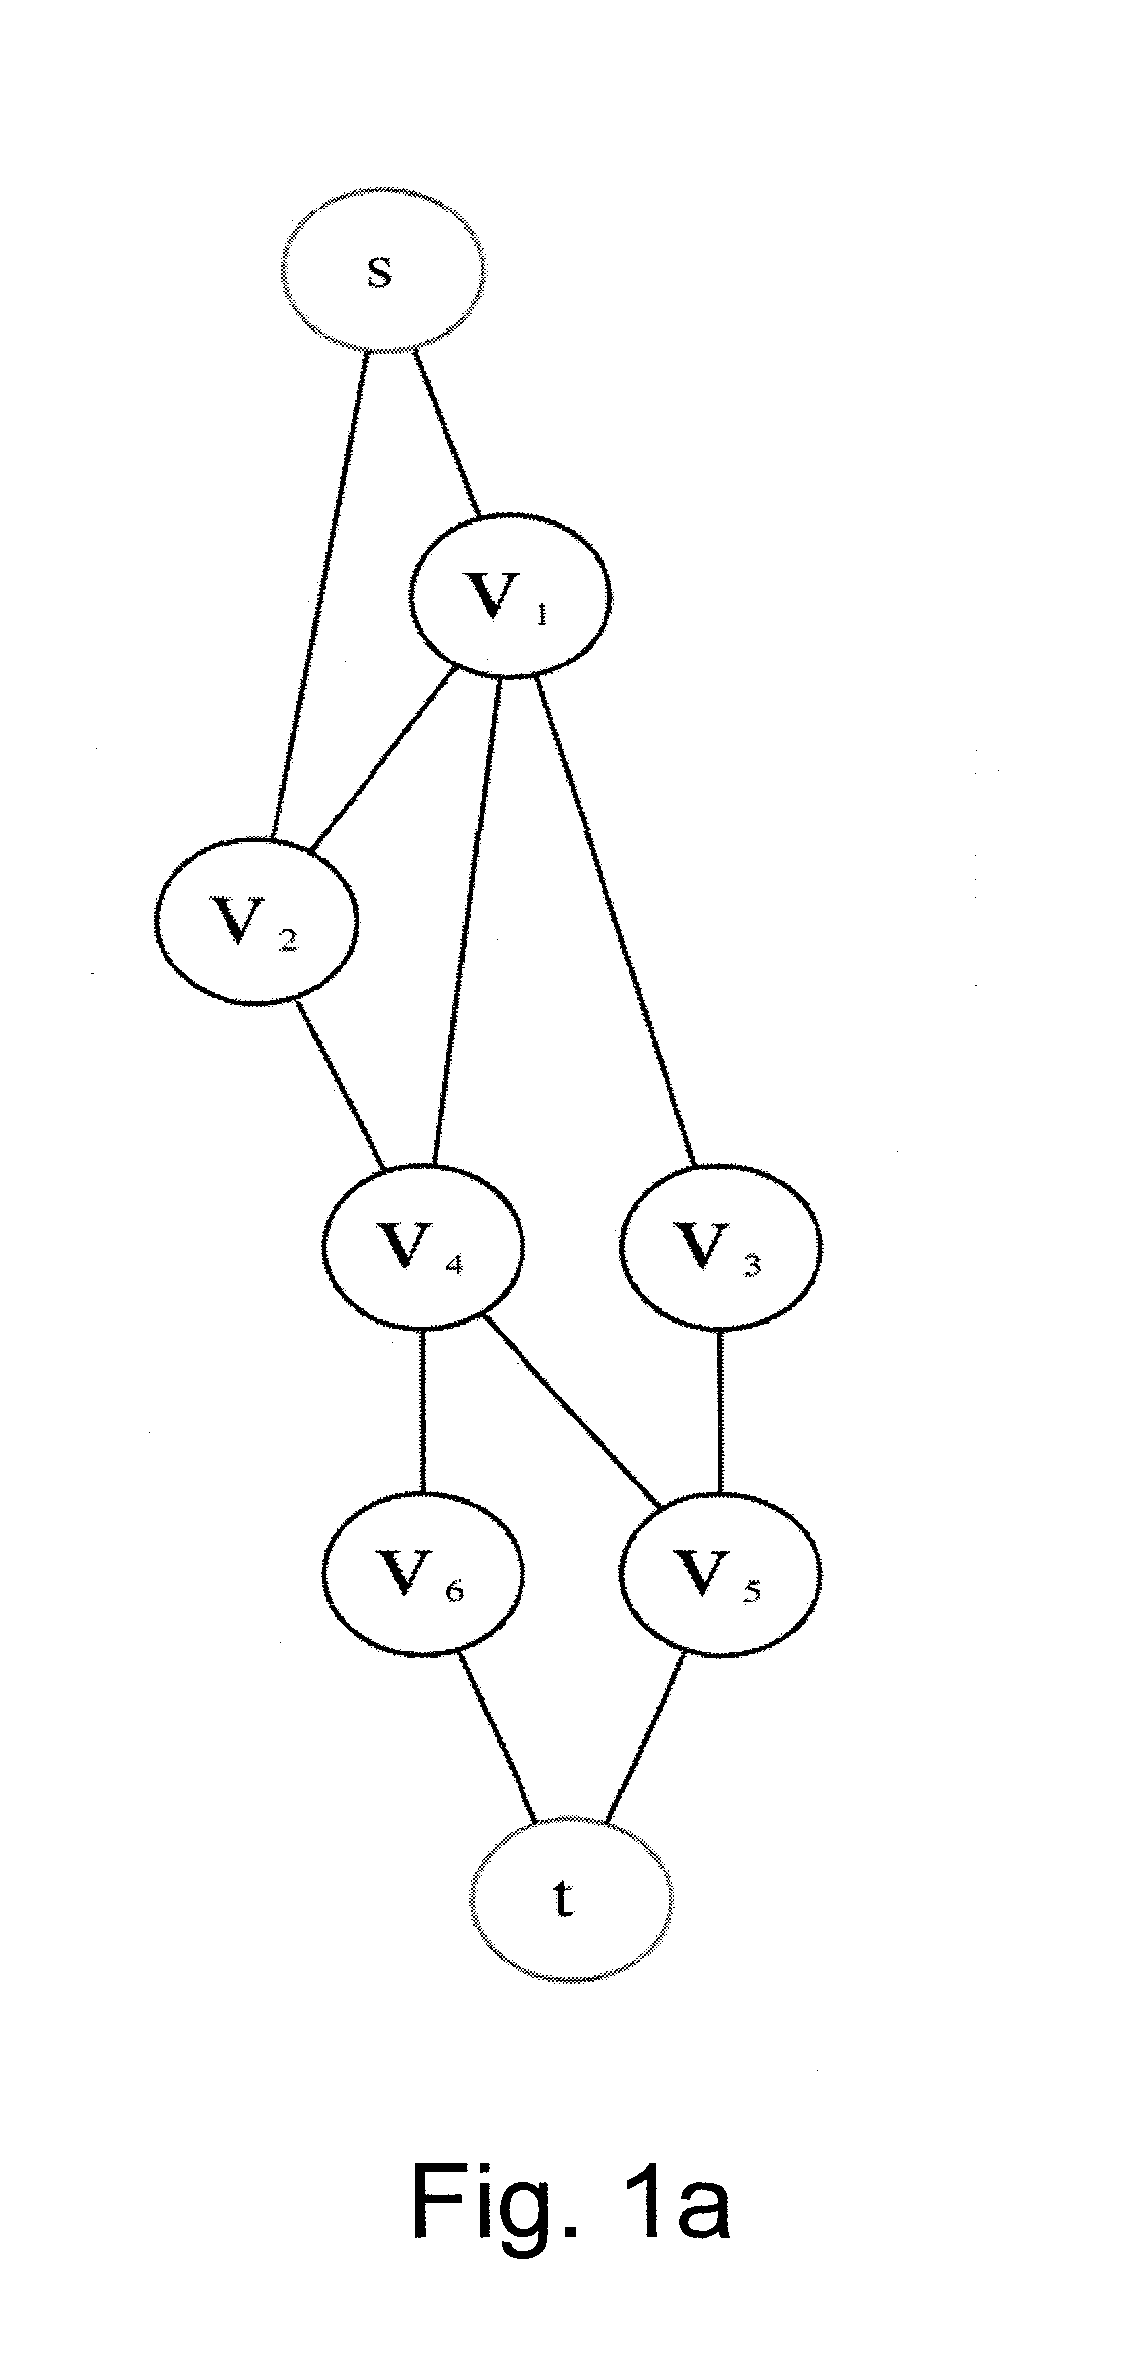 Method for establishing a secure private interconnection over a multipath network